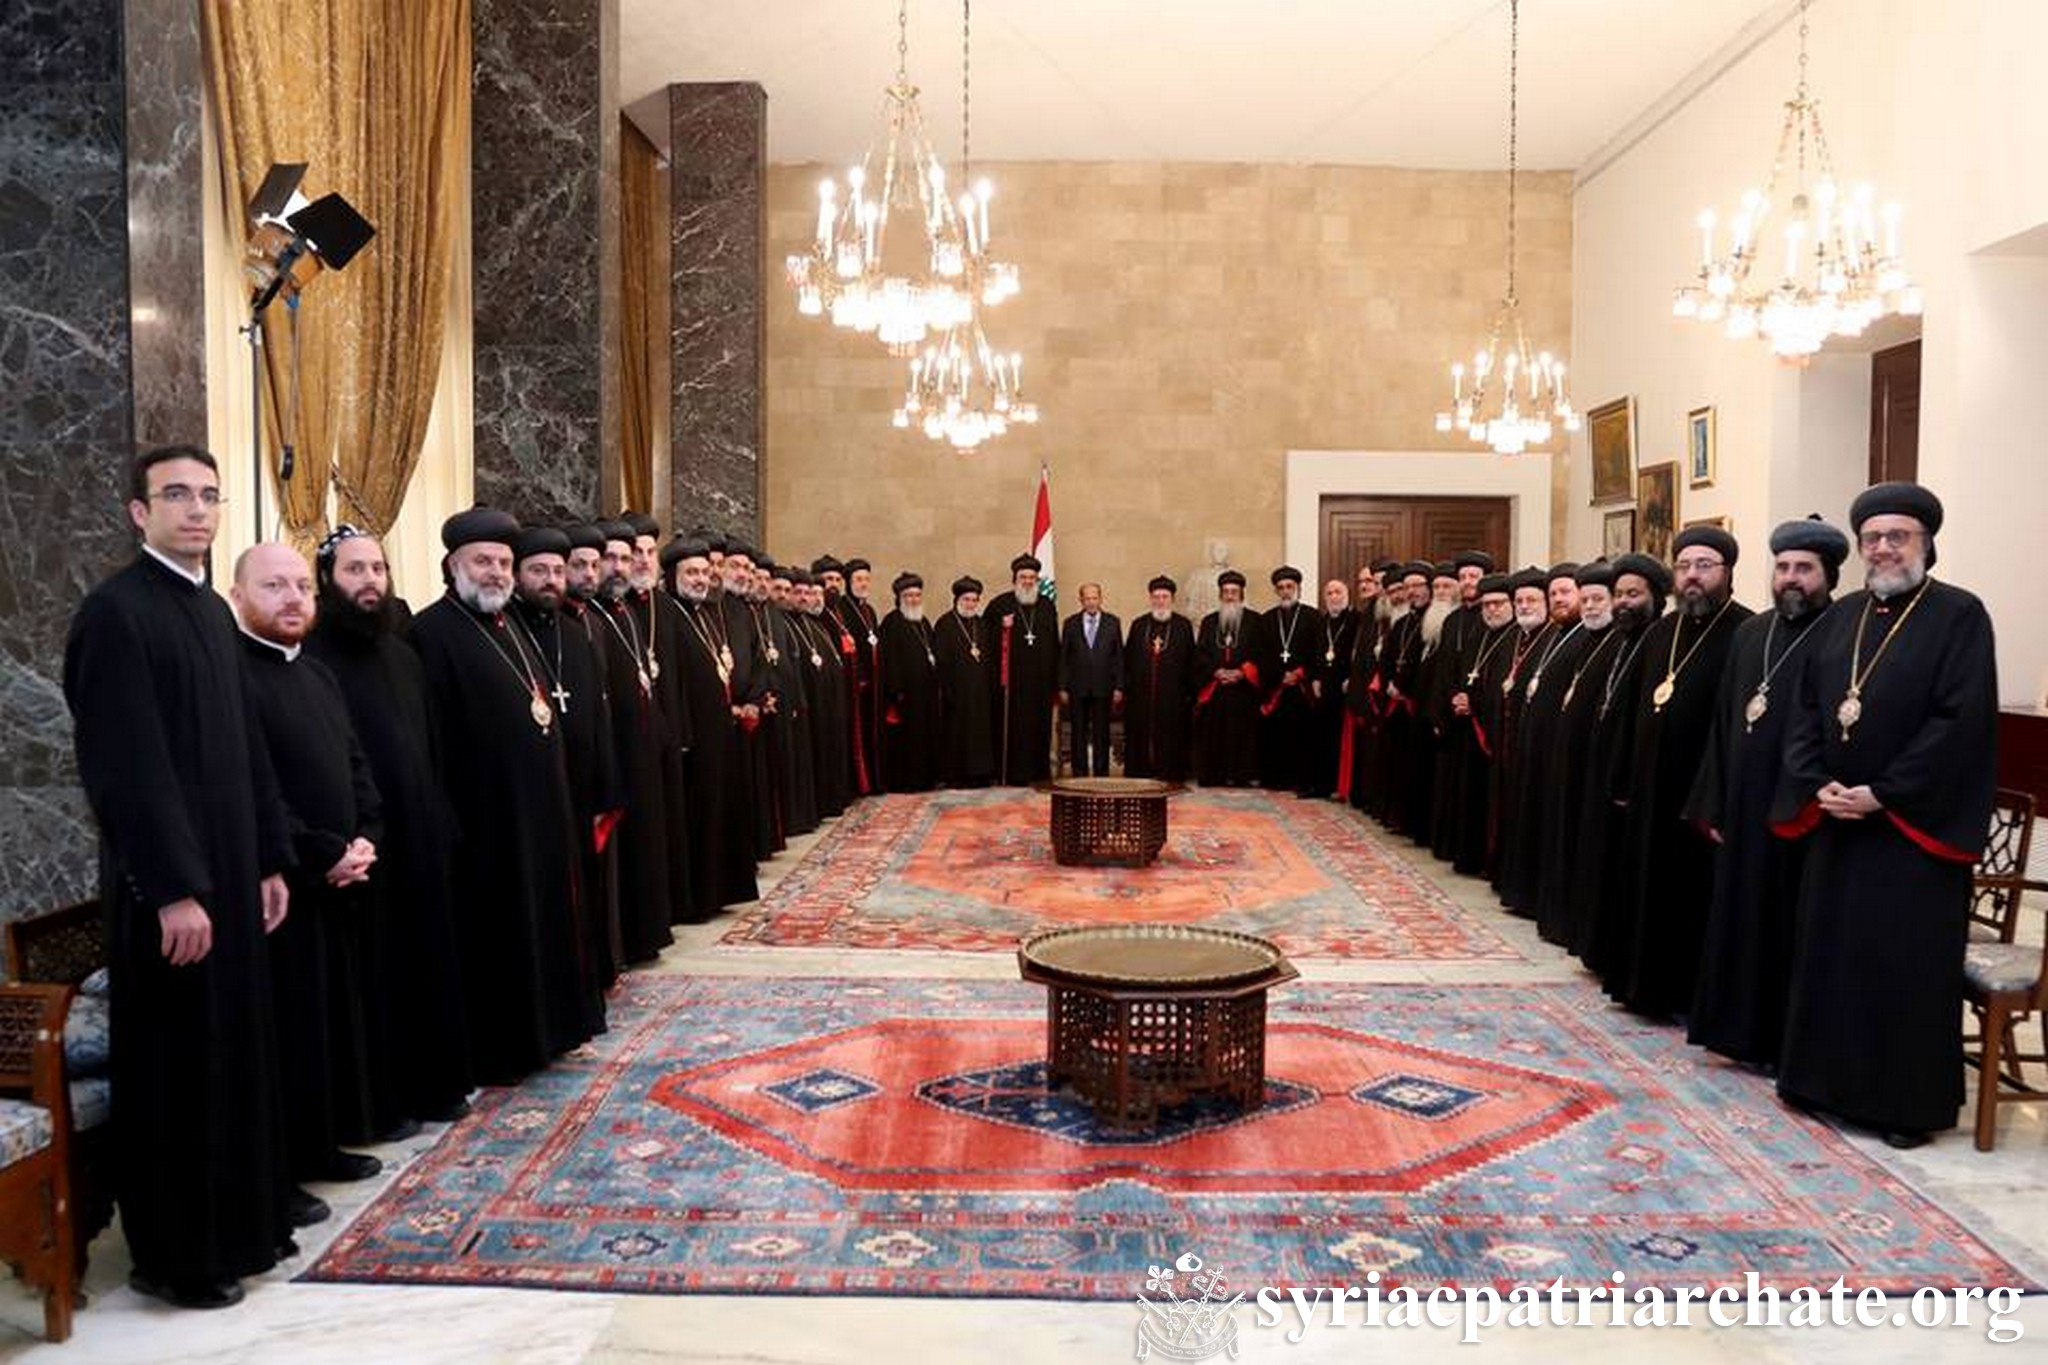 Syriac Orthodox Holy Synod Delegation Visits His Excellency President of the Republic of Lebanon